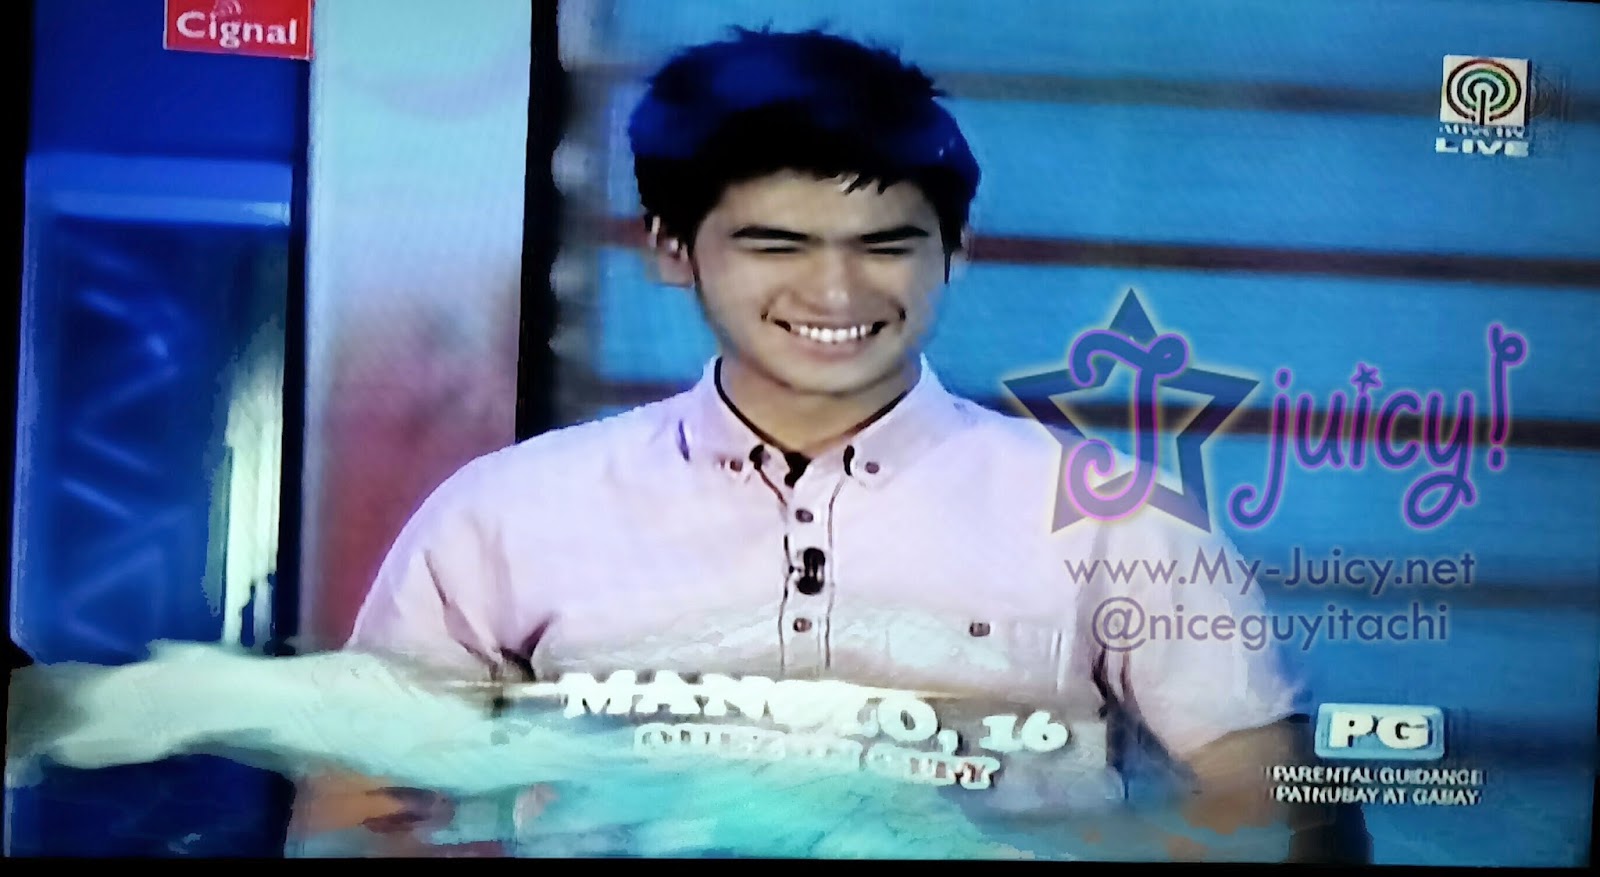 Manolo "Wonder Son ng Quezon City" PBB All in Housemate